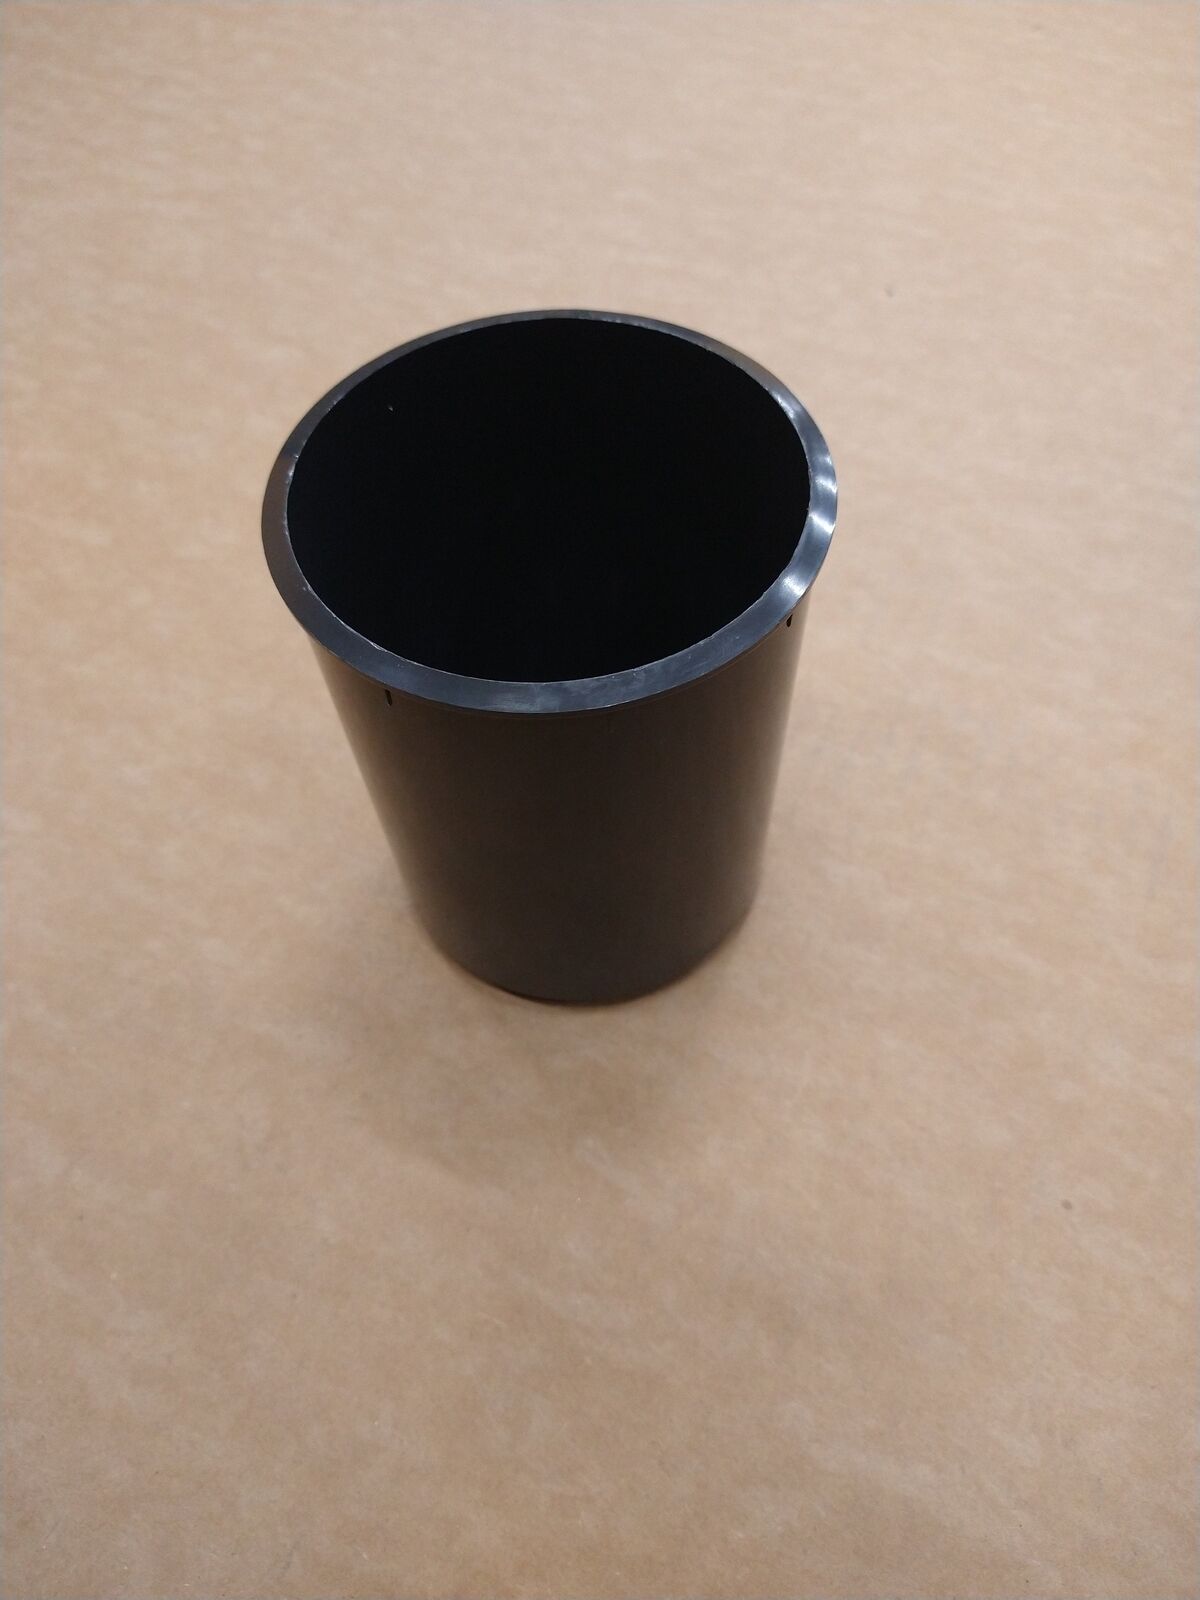 Life Fitness: CUP HOLDER, PLASTIC: 0K61-01013-0201